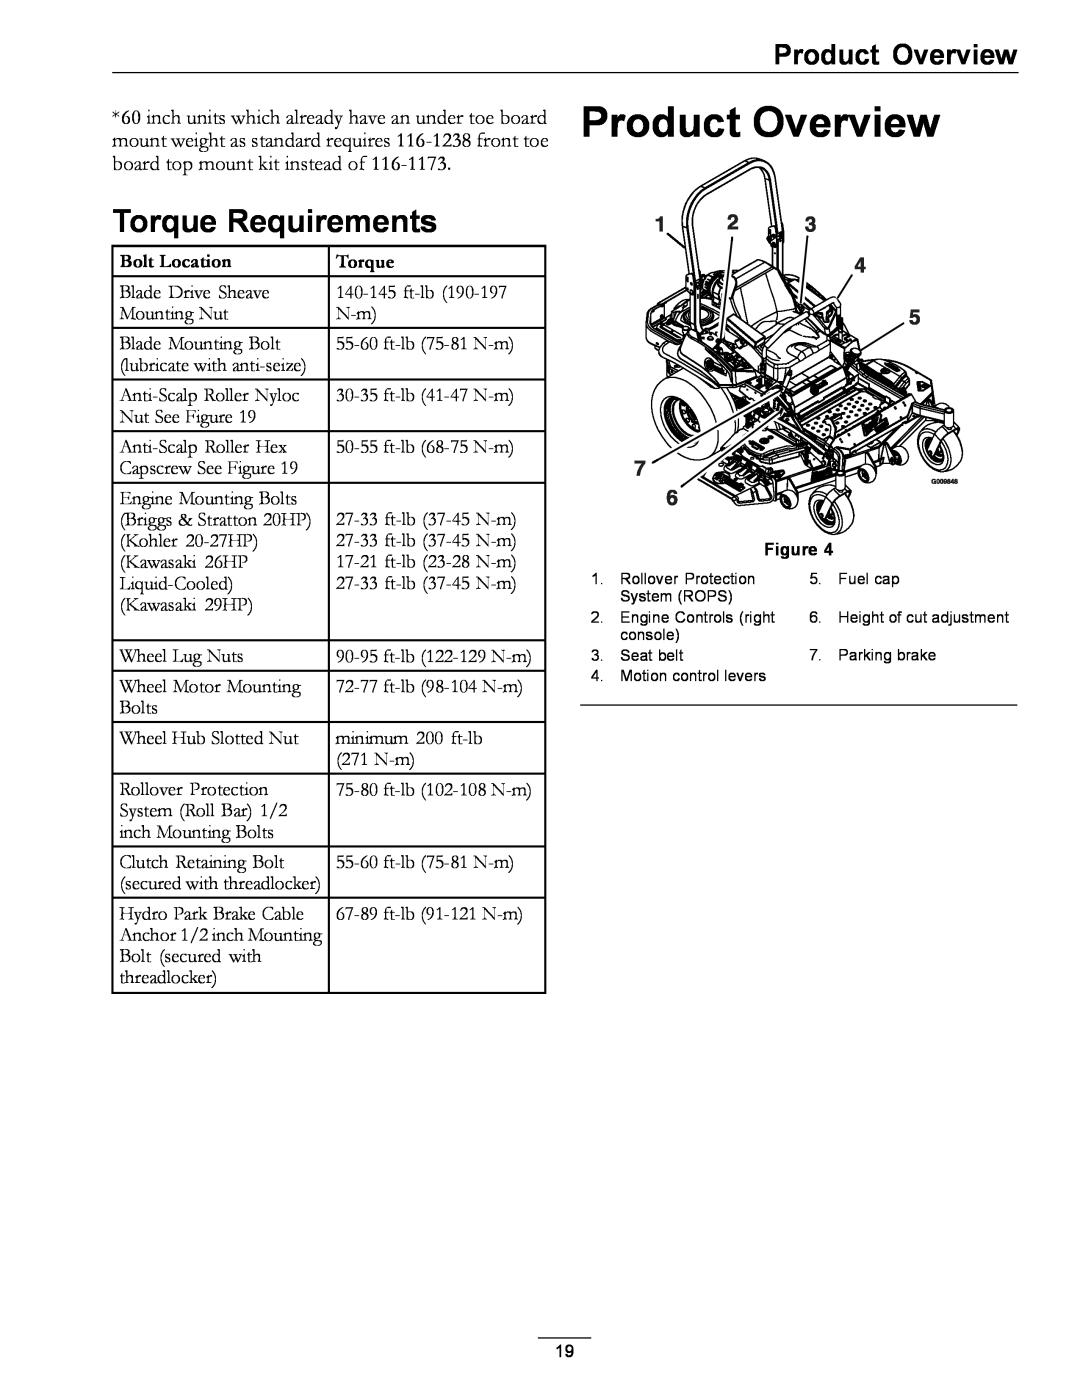 Exmark 000 & higher manual Product Overview, Torque Requirements 